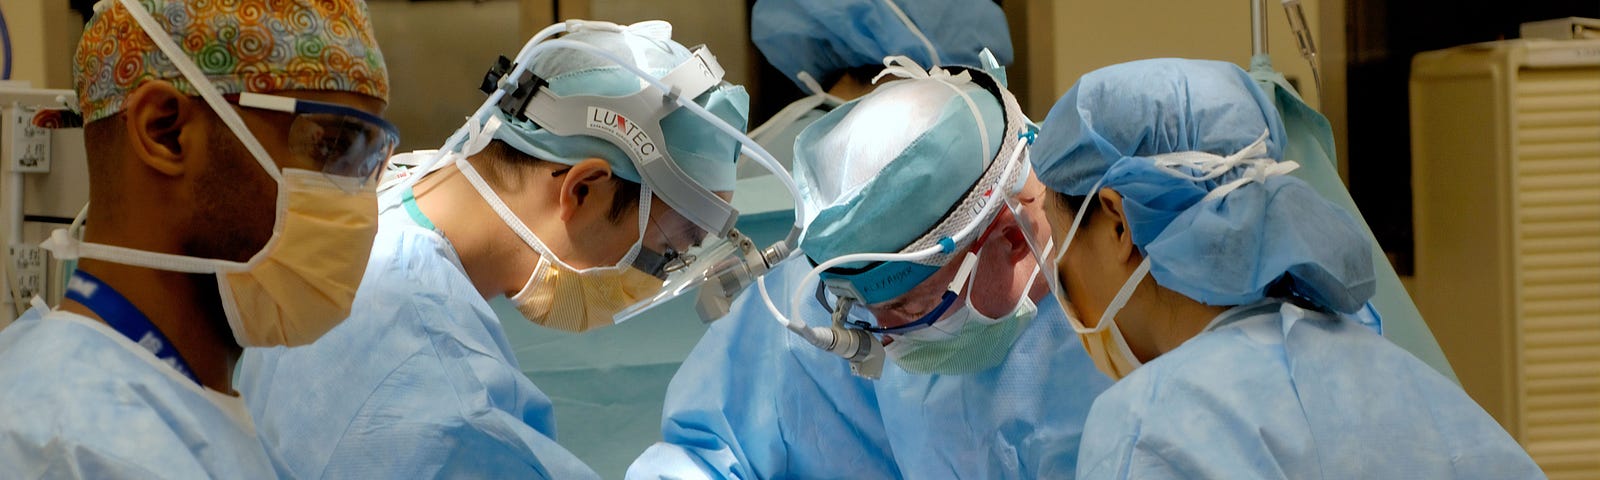 A team of medical people, engaged in replacing a patient’s hip with a prosthetic one.